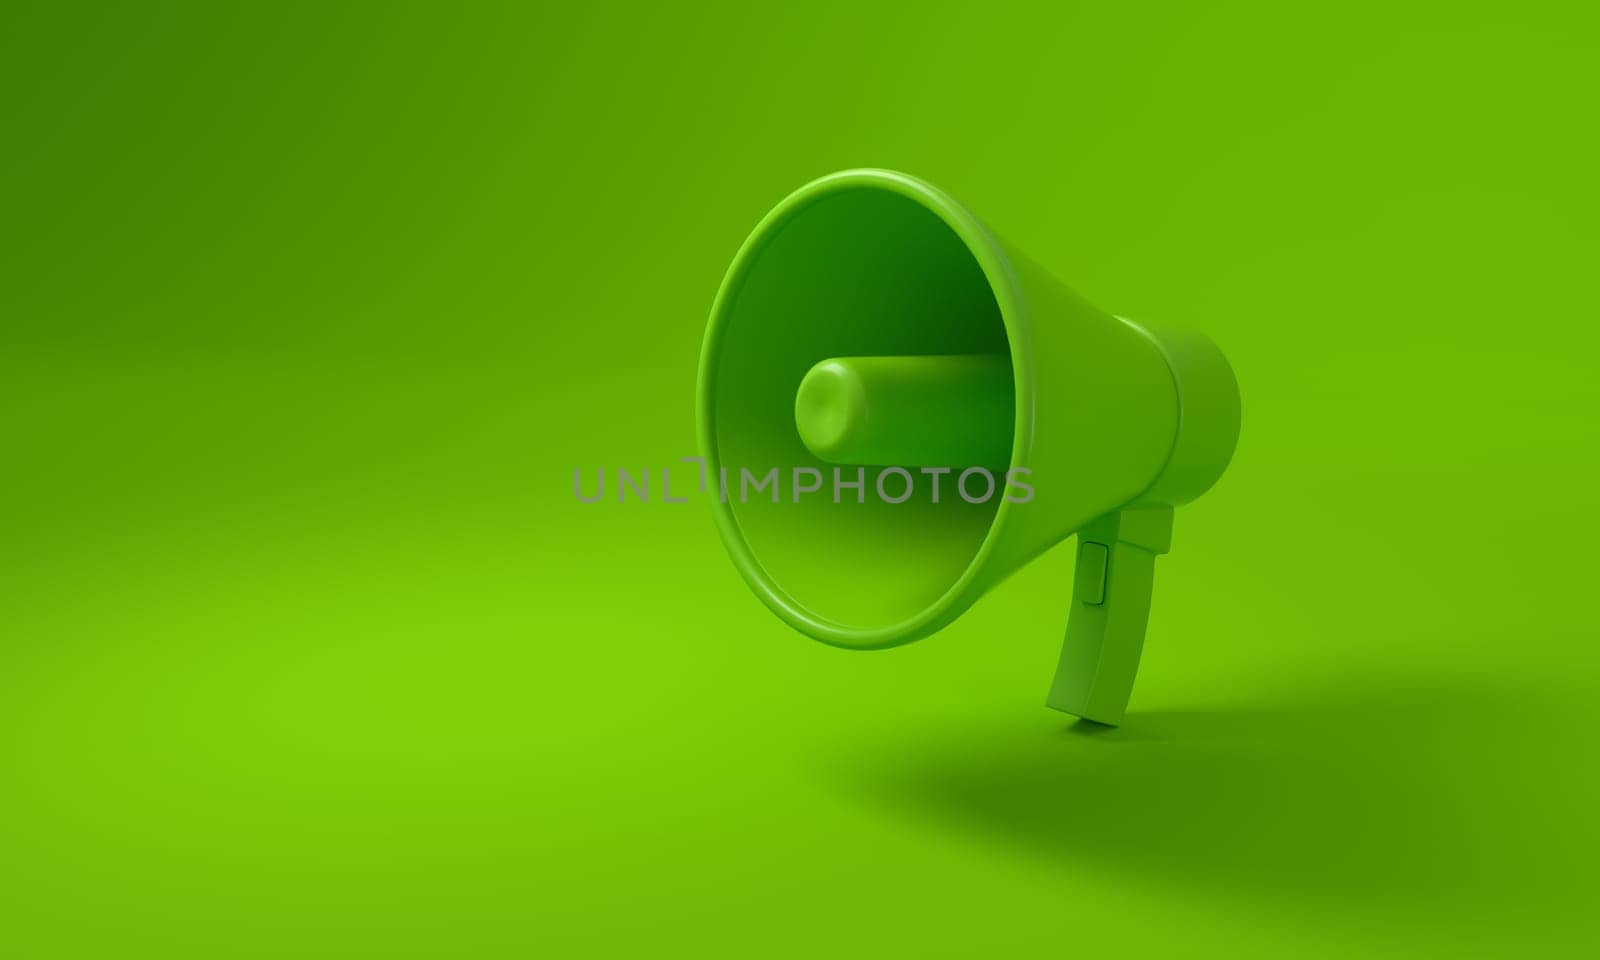 Megaphone on green background, Sustainability concept. 3D illustration.